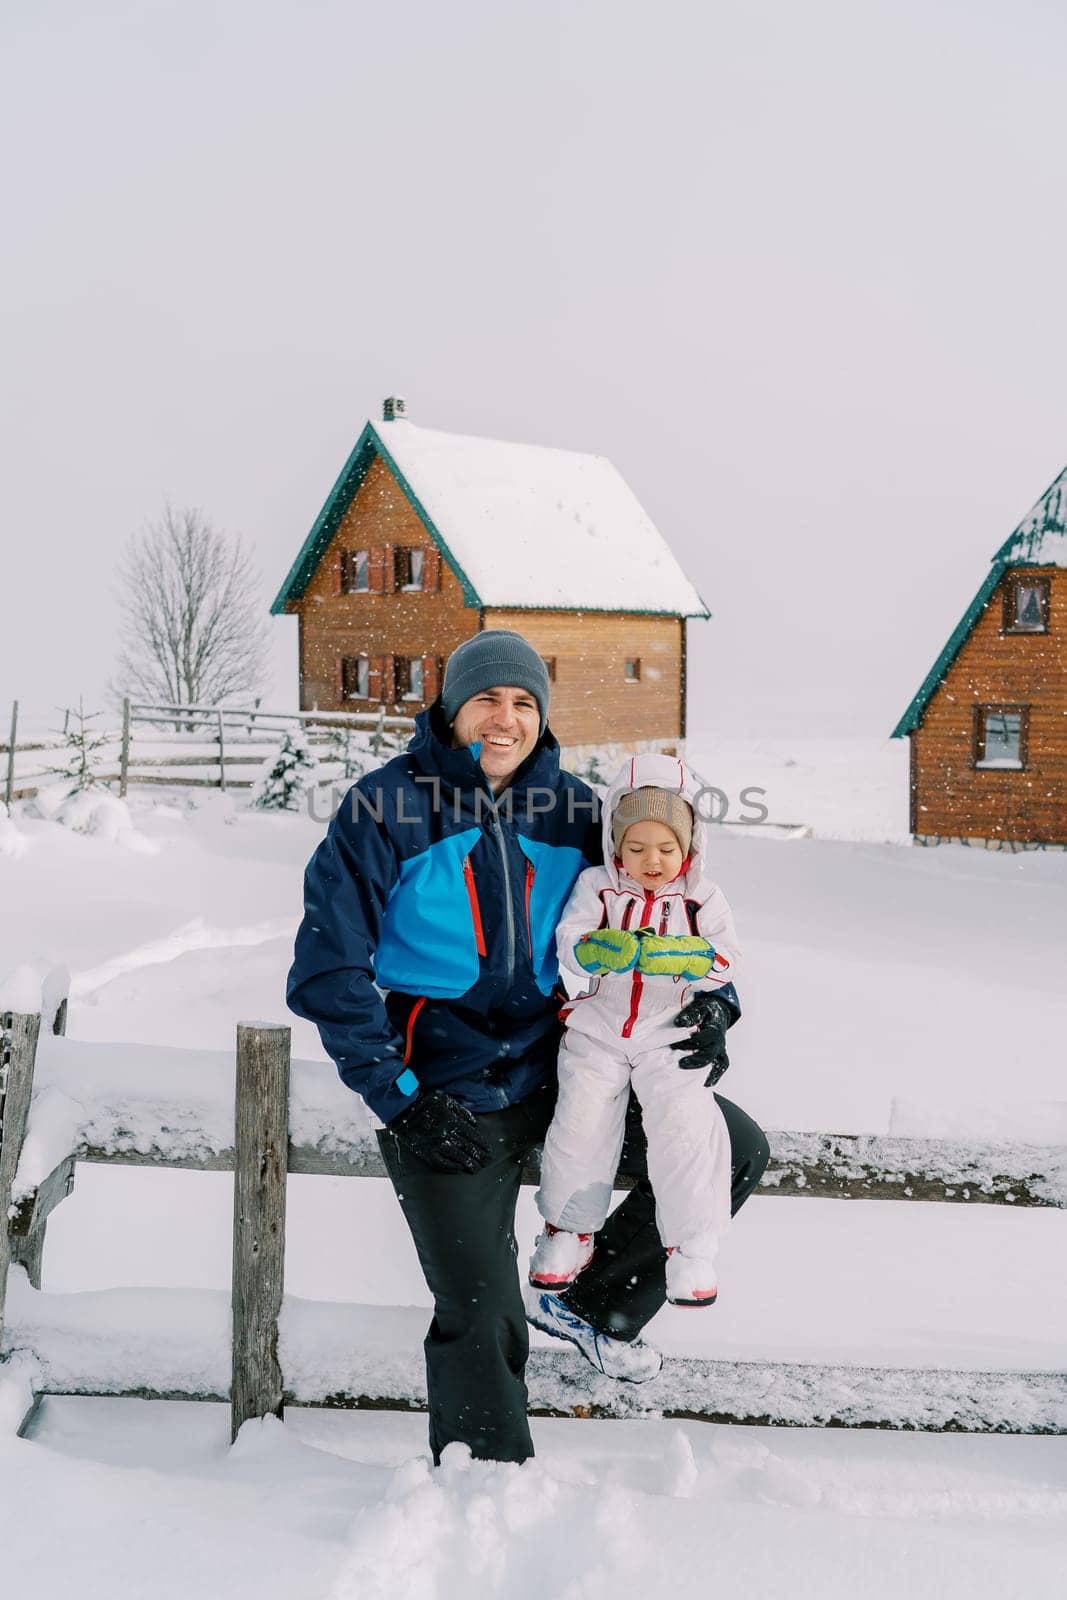 Smiling dad with a little girl on his lap sitting on a snow-covered fence in the village by Nadtochiy